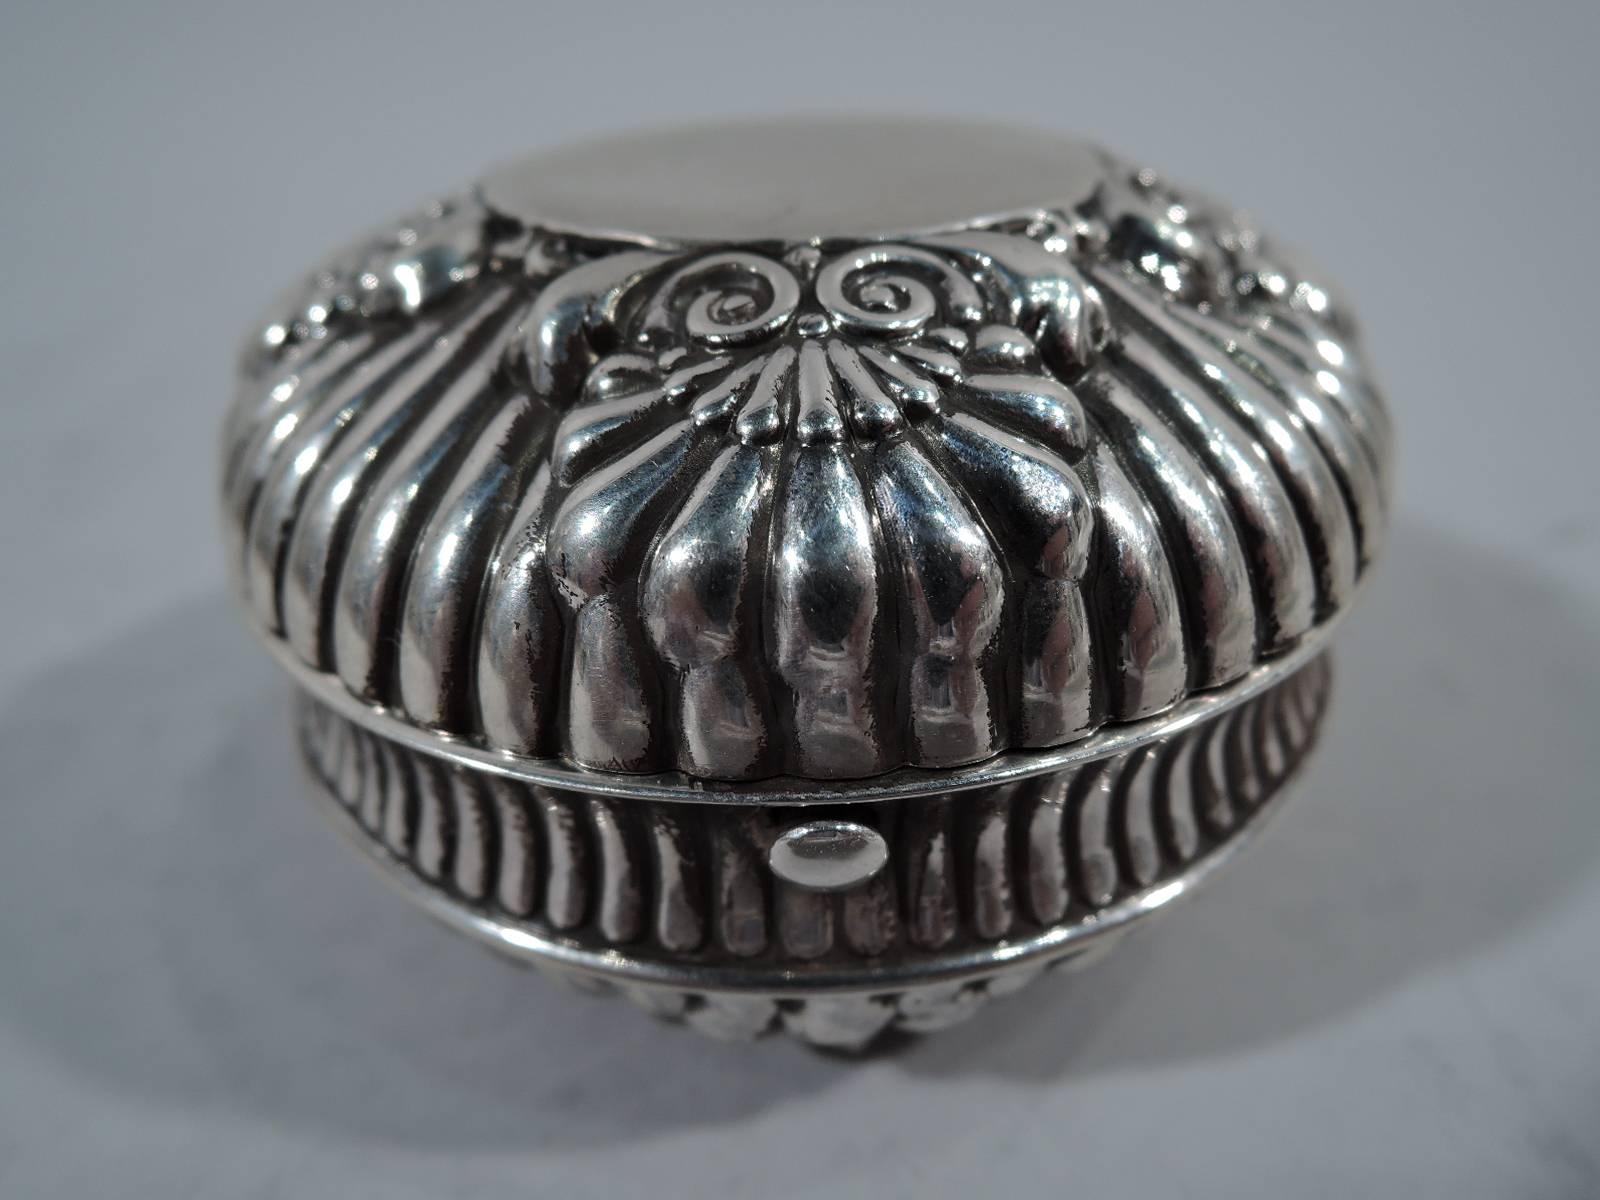 Sterling silver traveling inkwell. Made by Gorham in Providence in 1890. Round and lobed with stylized scallop shells. On top central circular frame (vacant). On bottom4 ball supports. Hinged cover. Interior has glass bottle with hinged cover.